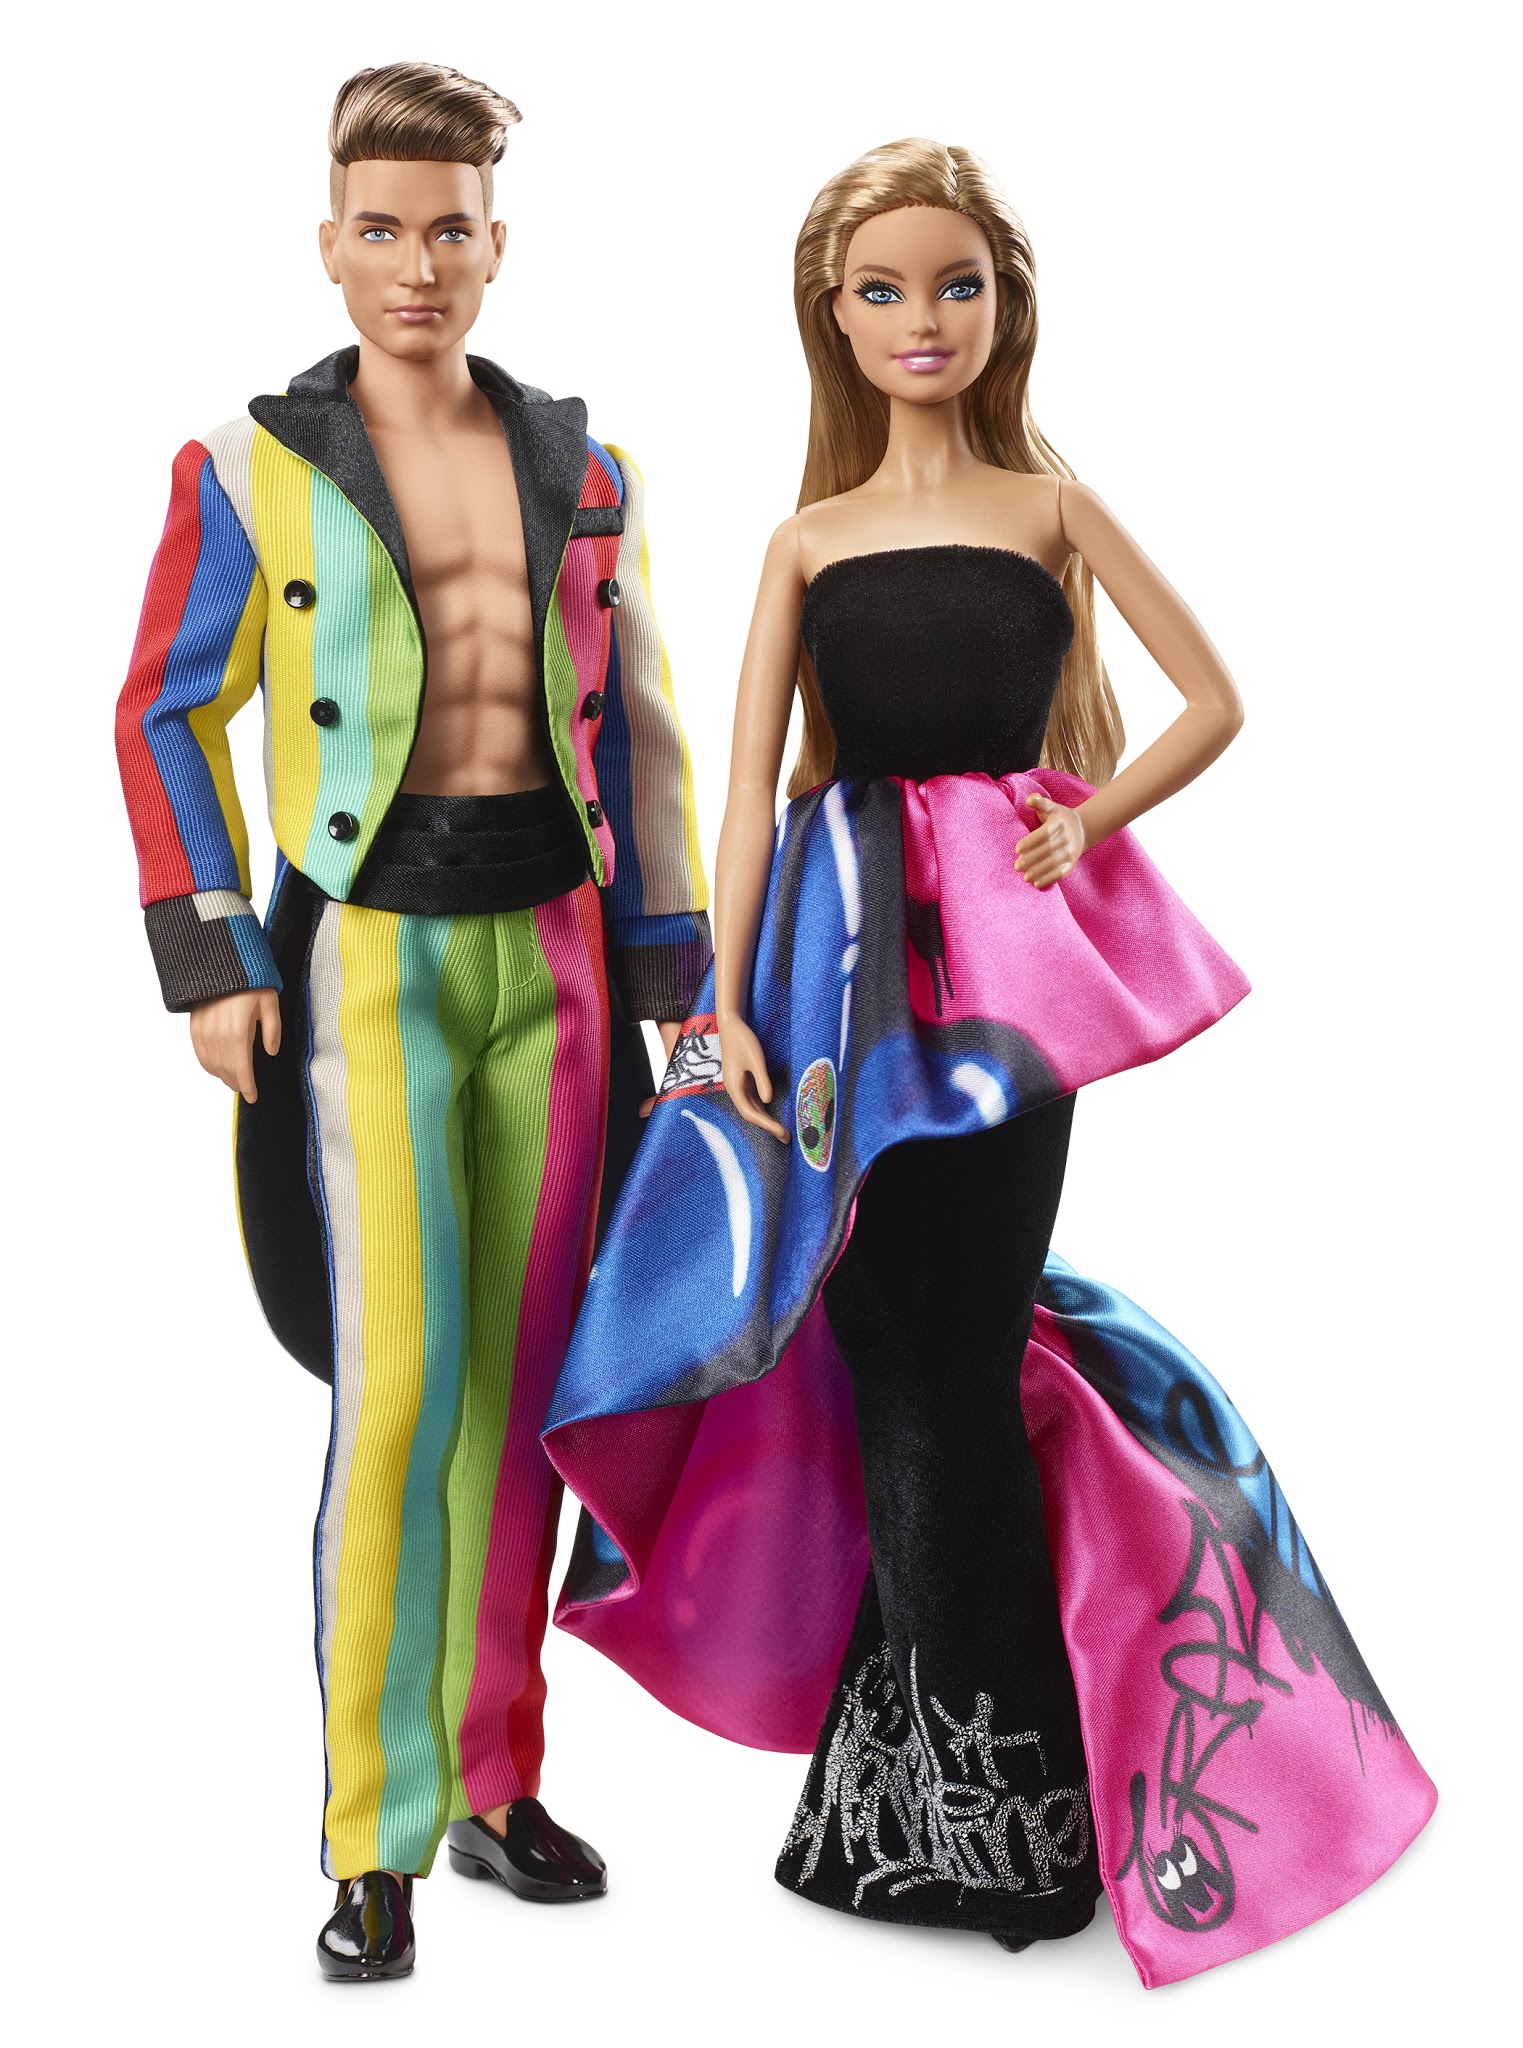 Moschino Collaborates with Barbie For the 3rd Time!